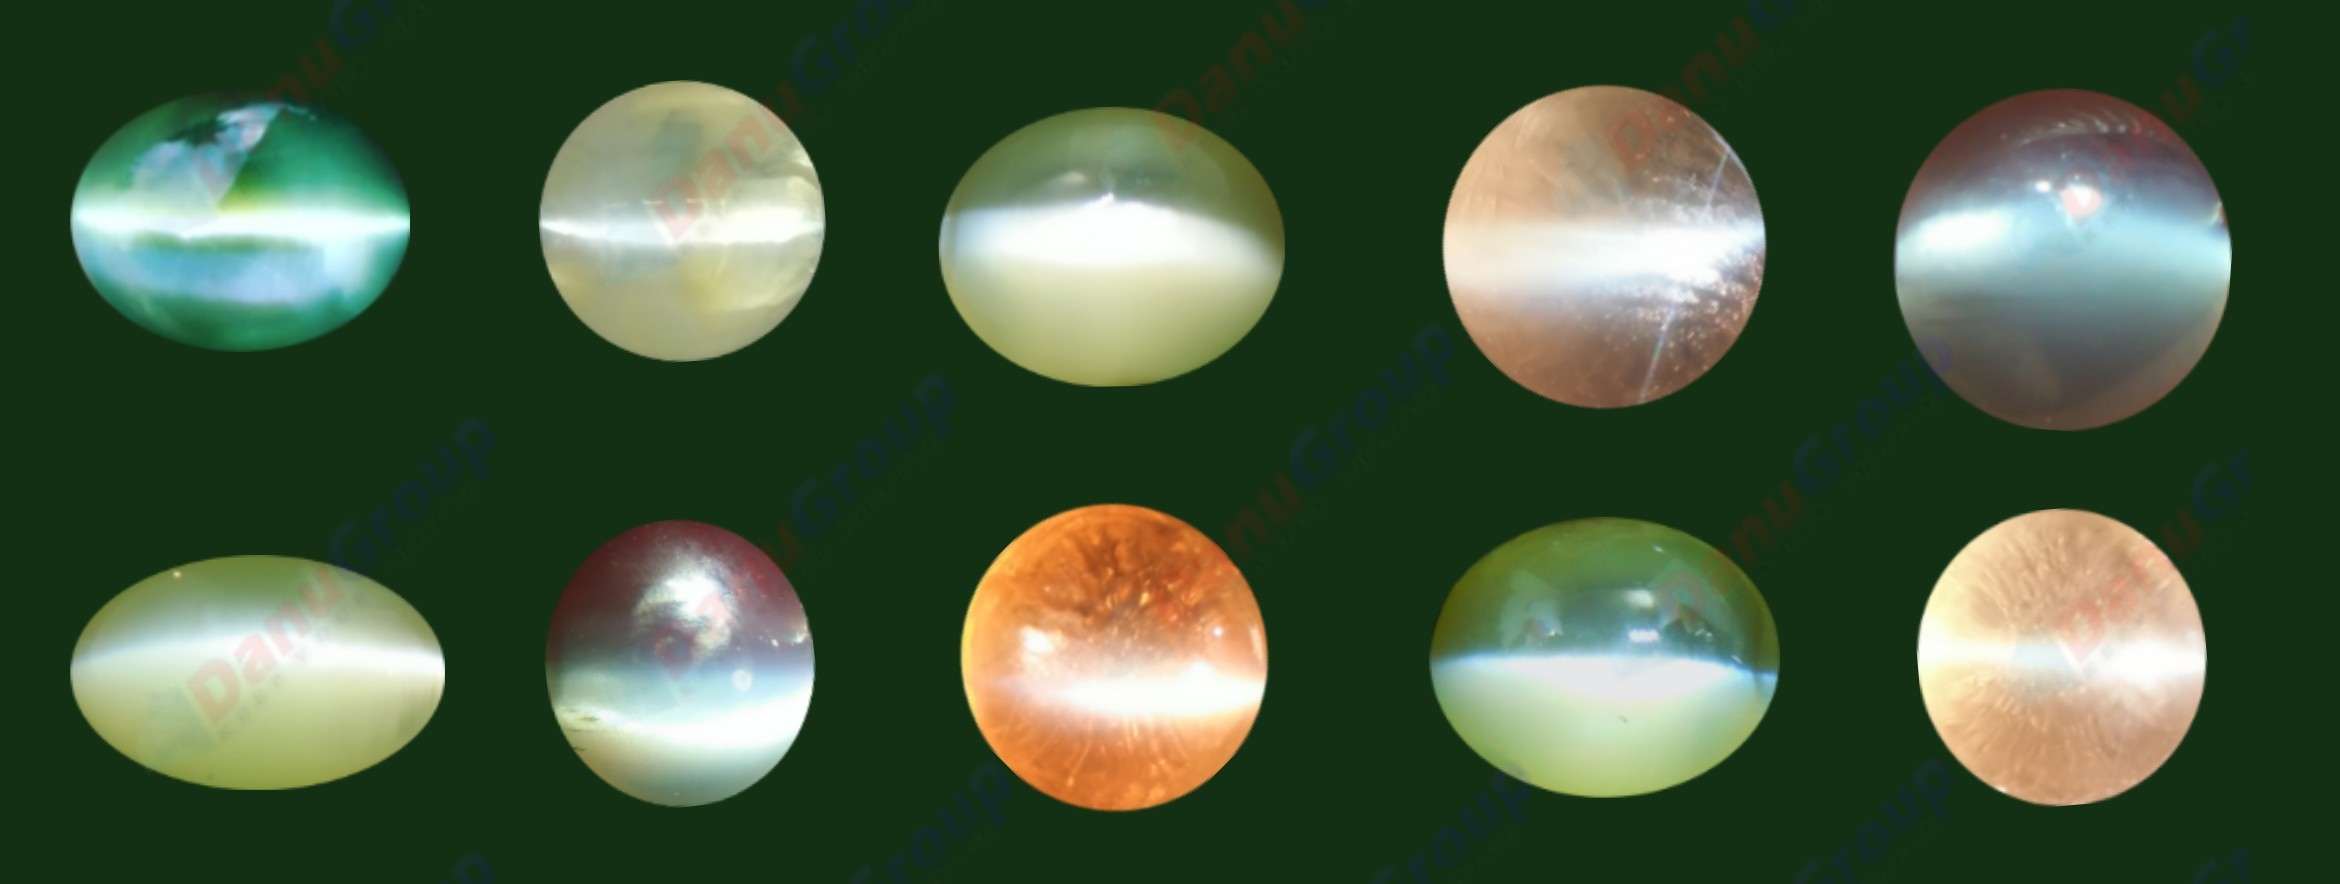 Chrysoberyl cat's eye is a gemstone variety of beryllium aluminum oxide which exhibits optical effect known as 'chatoyancy' that contains large numbers of fibrous inclusions can produce a " Chatoyant " a line of light across the surface of the stone that orients perpendicular to the included fibers. that resembles the slit eye of a cat, hence the name 'cat's eye'. The Gemstone Chrysoberyl is an aluminate of beryllium with the chemical formula BeAl₂O₄. The name chrysoberyl is derived from the Greek words "chrysos" and "beryllos". Its meaning is "a gold-white spar". It is known as a hard and durable gem after Sapphire. Chrysoberyl is an orthorhombic crystal mineral with 3.5 – 3.84 specific gravity and 8.5 hardness according to the more hardness scale. It is a Biaxial (+) mineral with refractive indexes nα=1.745 nβ=1.748 nγ=1.754. Chrysoberyl Cats Eye can be found colors such as green, yellow, brownish to greenish-black, colorless, pale shades of yellow, greenish Yellow, Yellowish Green, Honey Brown, Reddish Brown, Orangy yellow, Greenish Brown, Blue. Also, Golden Yellow Chrysoberyl is called "Ceylonese Chrysolite" as a trading name. The Chrysoberyl Alexandrite is a color change variety upon the nature of ambient lighting. It changes the color green to brownish red or green to purplish-red in the incandescent light from a lamp or candle flame. However, Alexandrite's good color change stones are extremely rare. also, Chrysoberyl alexandrite can be found with a chatoyancy future. It is rare and expensive. An interesting feature of its crystals are the cyclic twins called trillings. Also, Chrysoberyl can be found with the chatoyancy feature. Translucent yellowish chatoyant chrysoberyl is called as cymophane. Also, Chrysoberyl cat's eye is found in colors such as yellowish-green, green, honey brown, grey. The chrysoberyl gemstone or mineral can be found in Sri Lanka, Afghanistan, India, Madagascar, Tanzania, Ethiopia, Australia, Brazil, Canada, France, Germany, Italy, Japan, Kenya, Kazakhstan, Namibia, Myanmar, Mozambique, Norway, Russia, Spain, USA, Zambia. Healing Properties of Chrysoberyls Chrysoberyl is known as an effective and protective stone since ancient times. It transforms negative thoughts into positive energy. Chrysoberyl gemstone or mineral is associated with wealth and creativity and promotes tolerance and harmony. It stimulates the solar plexus and crown chakras. Chrysoberyl helps to open the crown chakra and increases both spiritual and personal power. Green chrysoberyl stimulates the healing of the physical heart. Chrysoberyl stimulates the cleansing and balancing of the liver, kidneys, gall bladder and balances adrenaline and cholesterol and fortifies the chest and liver. Chrysoberyl Cat's eye increases the vibration of Ketu in the wearer according to Vedic Astrology. It is known to reduce the malefic effects of 'Ketu' and increase its beneficial qualities. Cat’s eye transmits the cosmic color, infra-red, which is the hottest cosmic ray. It helps with terminal diseases such as paralysis and cancer. Cat’s eye can help in return of lost wealth.